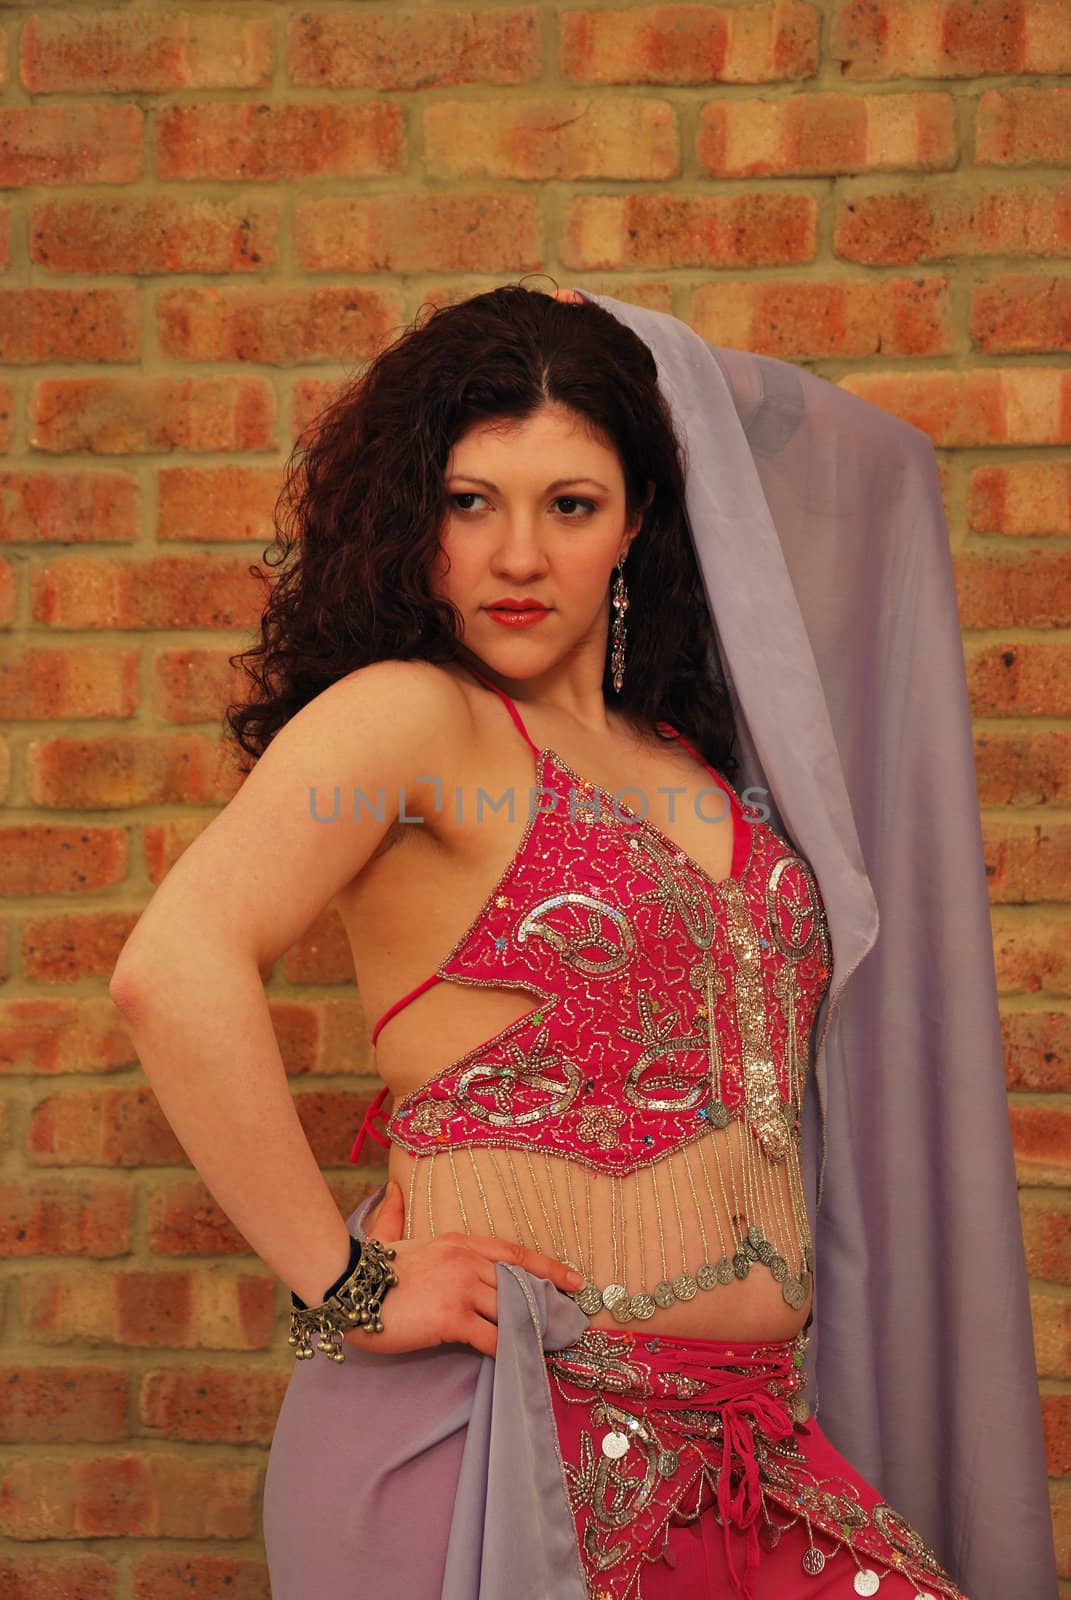 Belly Dancer in red costume